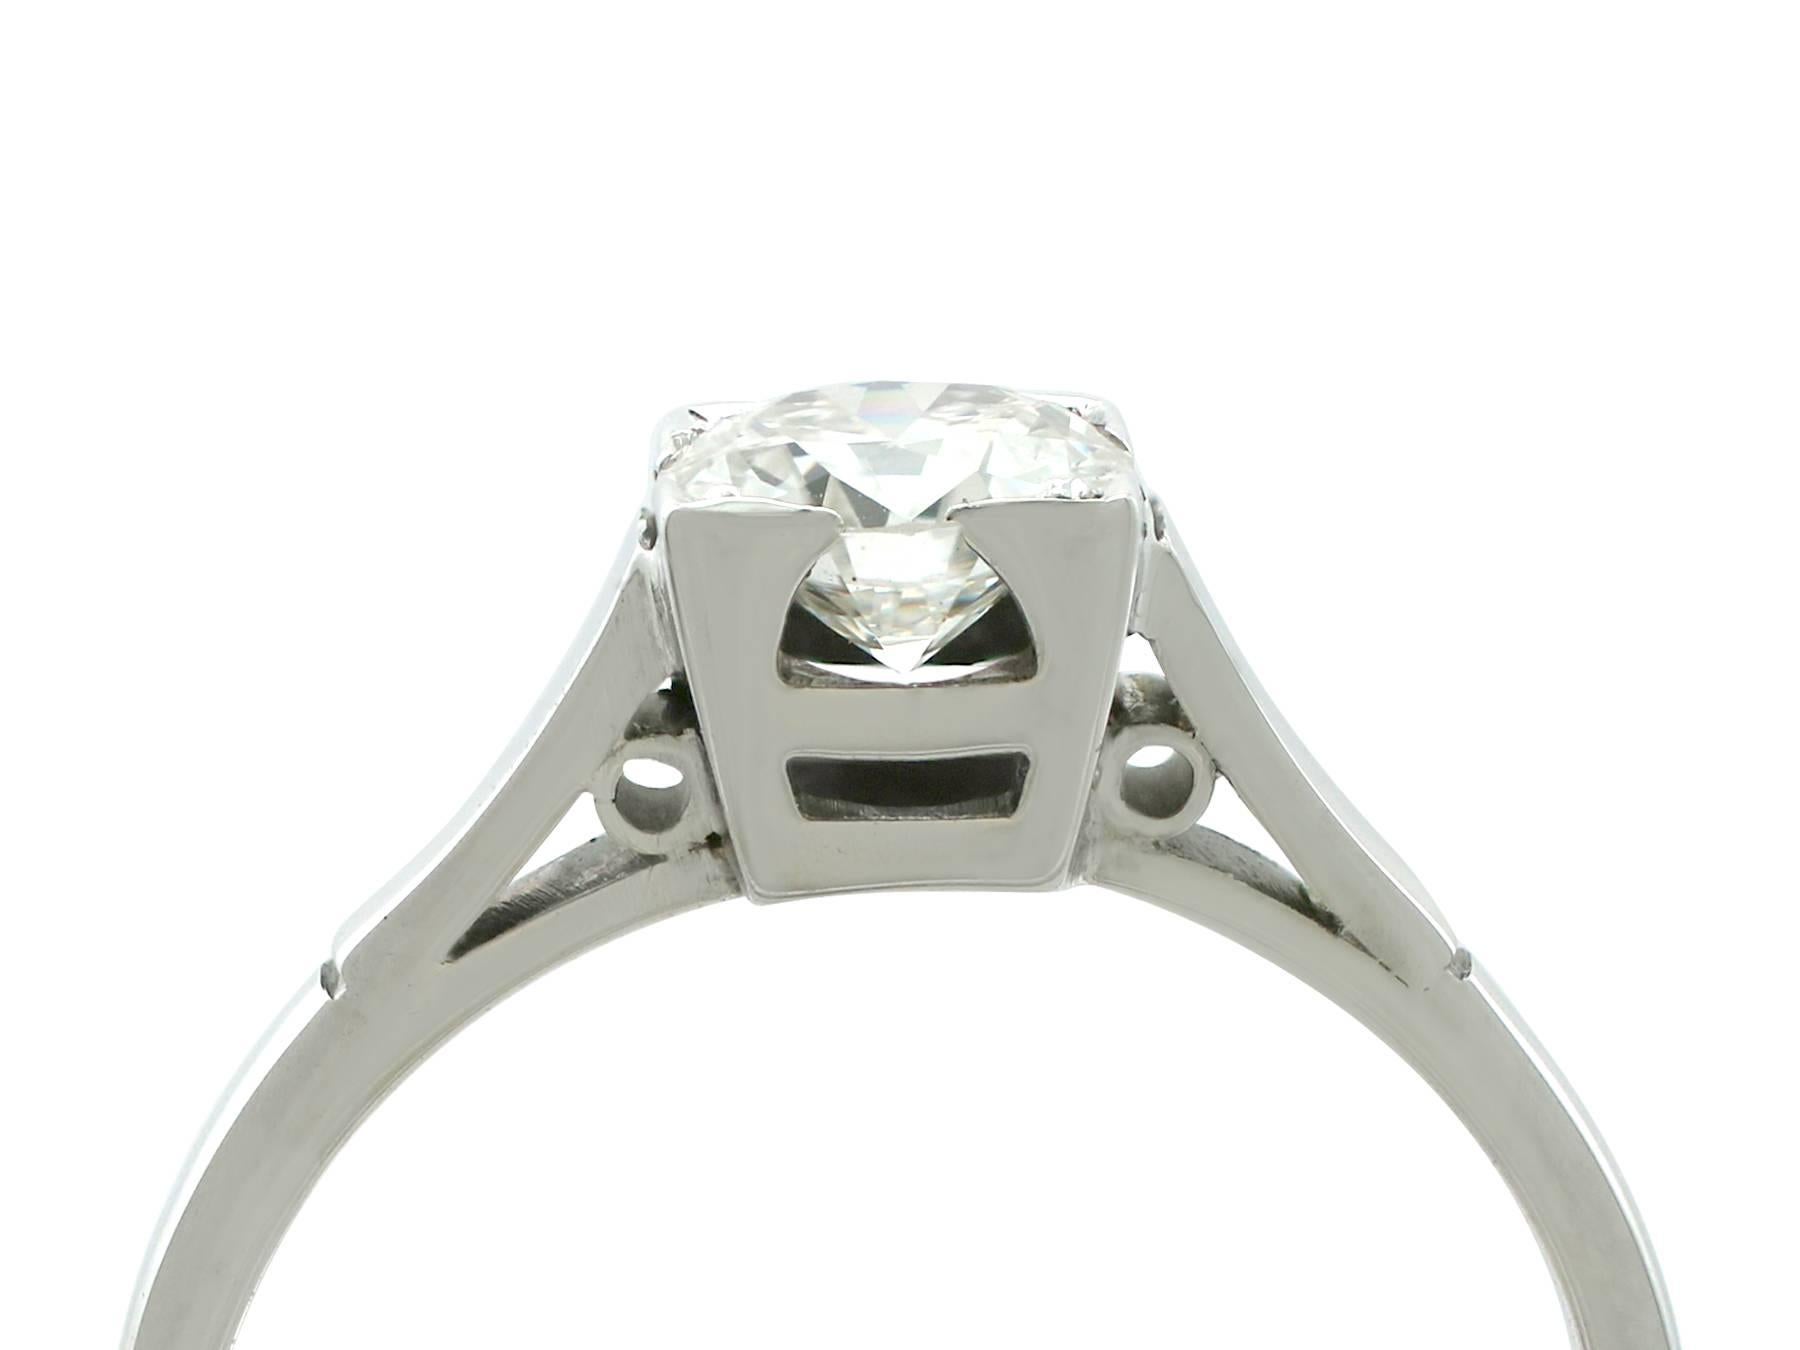 An impressive antique 1920's 0.68 carat diamond and 18 karat white gold solitaire style engagement ring; part of our diverse antique jewelry collections

This fine and impressive antique diamond solitaire ring has been crafted in 18k white gold.

Th